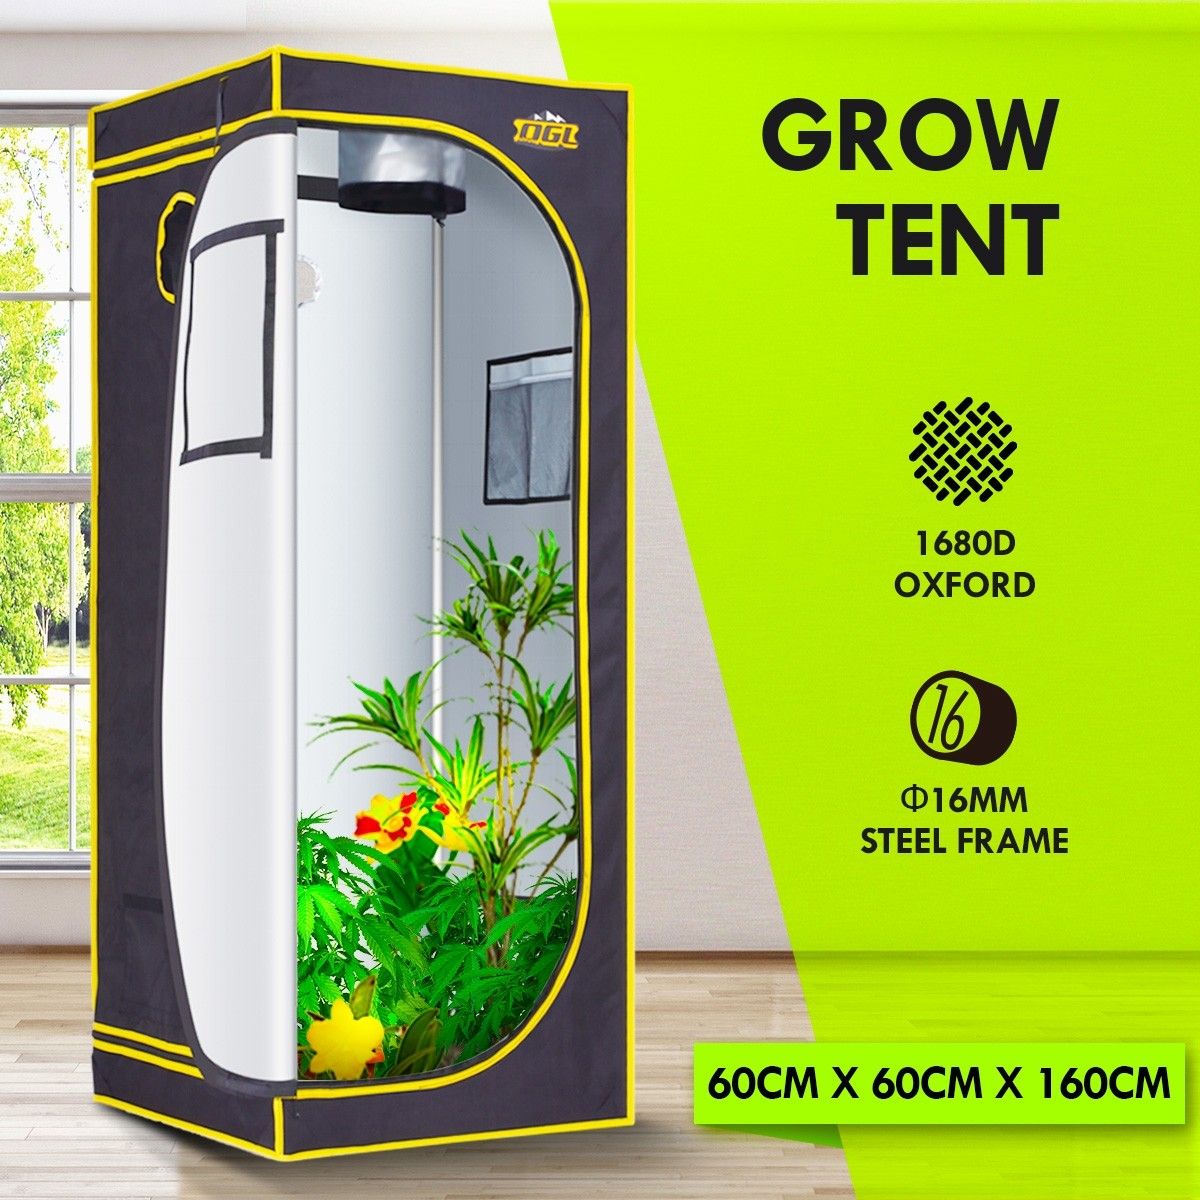 60x60x160cm Grow Tent Hydroponic Indoor Plant Growing Tent Reflective 1680D Oxford Fabric